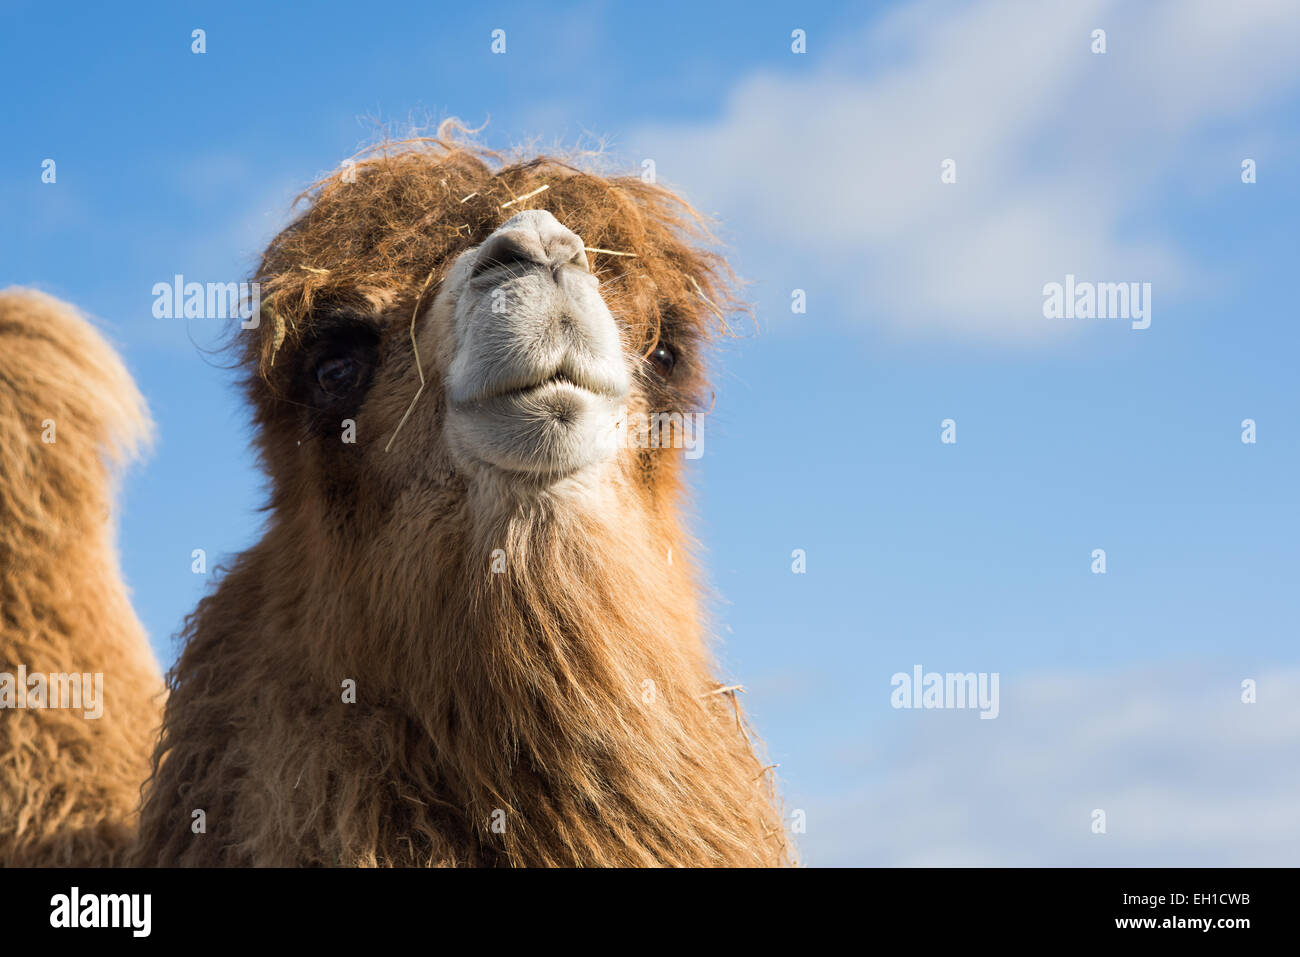 Close up of camel with hump visible against sky Stock Photo